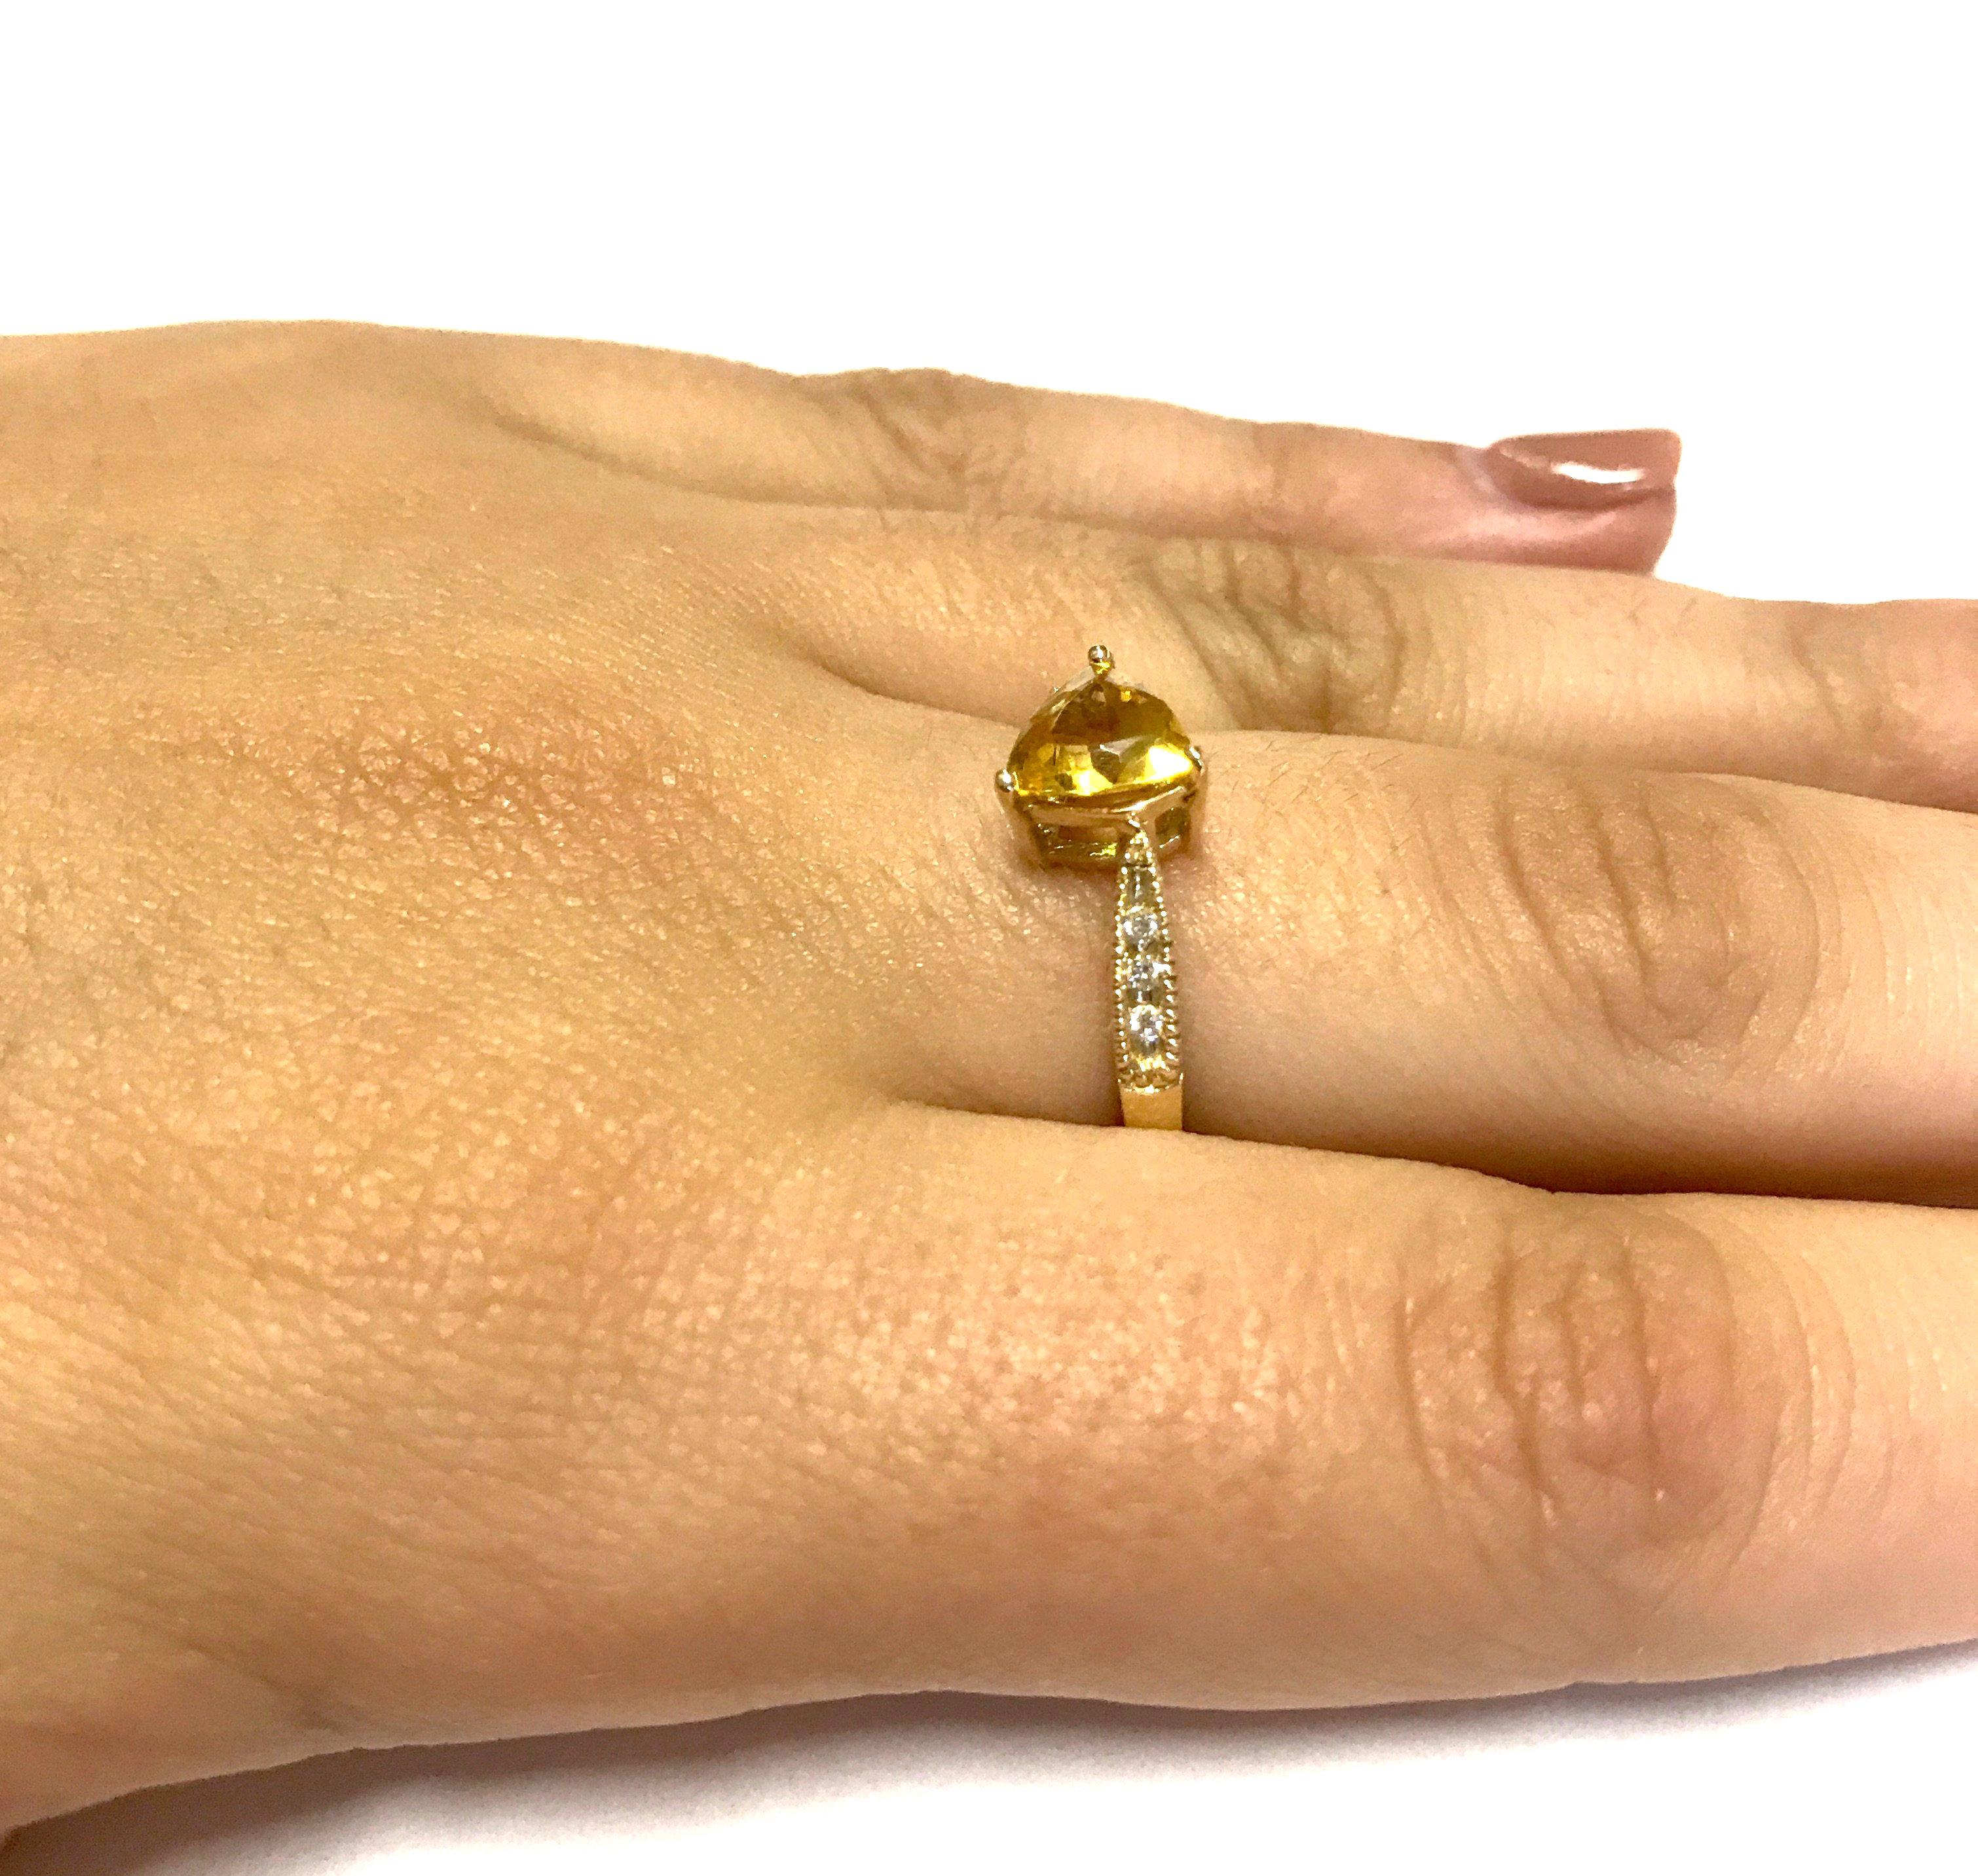 Material: 14k Yellow Gold 
Center Stone Details: 0.82 Carat Trillion Cut Yellow Beryl 
Mounting Diamond Details: 6 Round White Diamonds Approximately 0.07 Carats - Clarity: SI / Color: H-I
Ring Size: 6.5. Alberto offers complimentary sizing on all